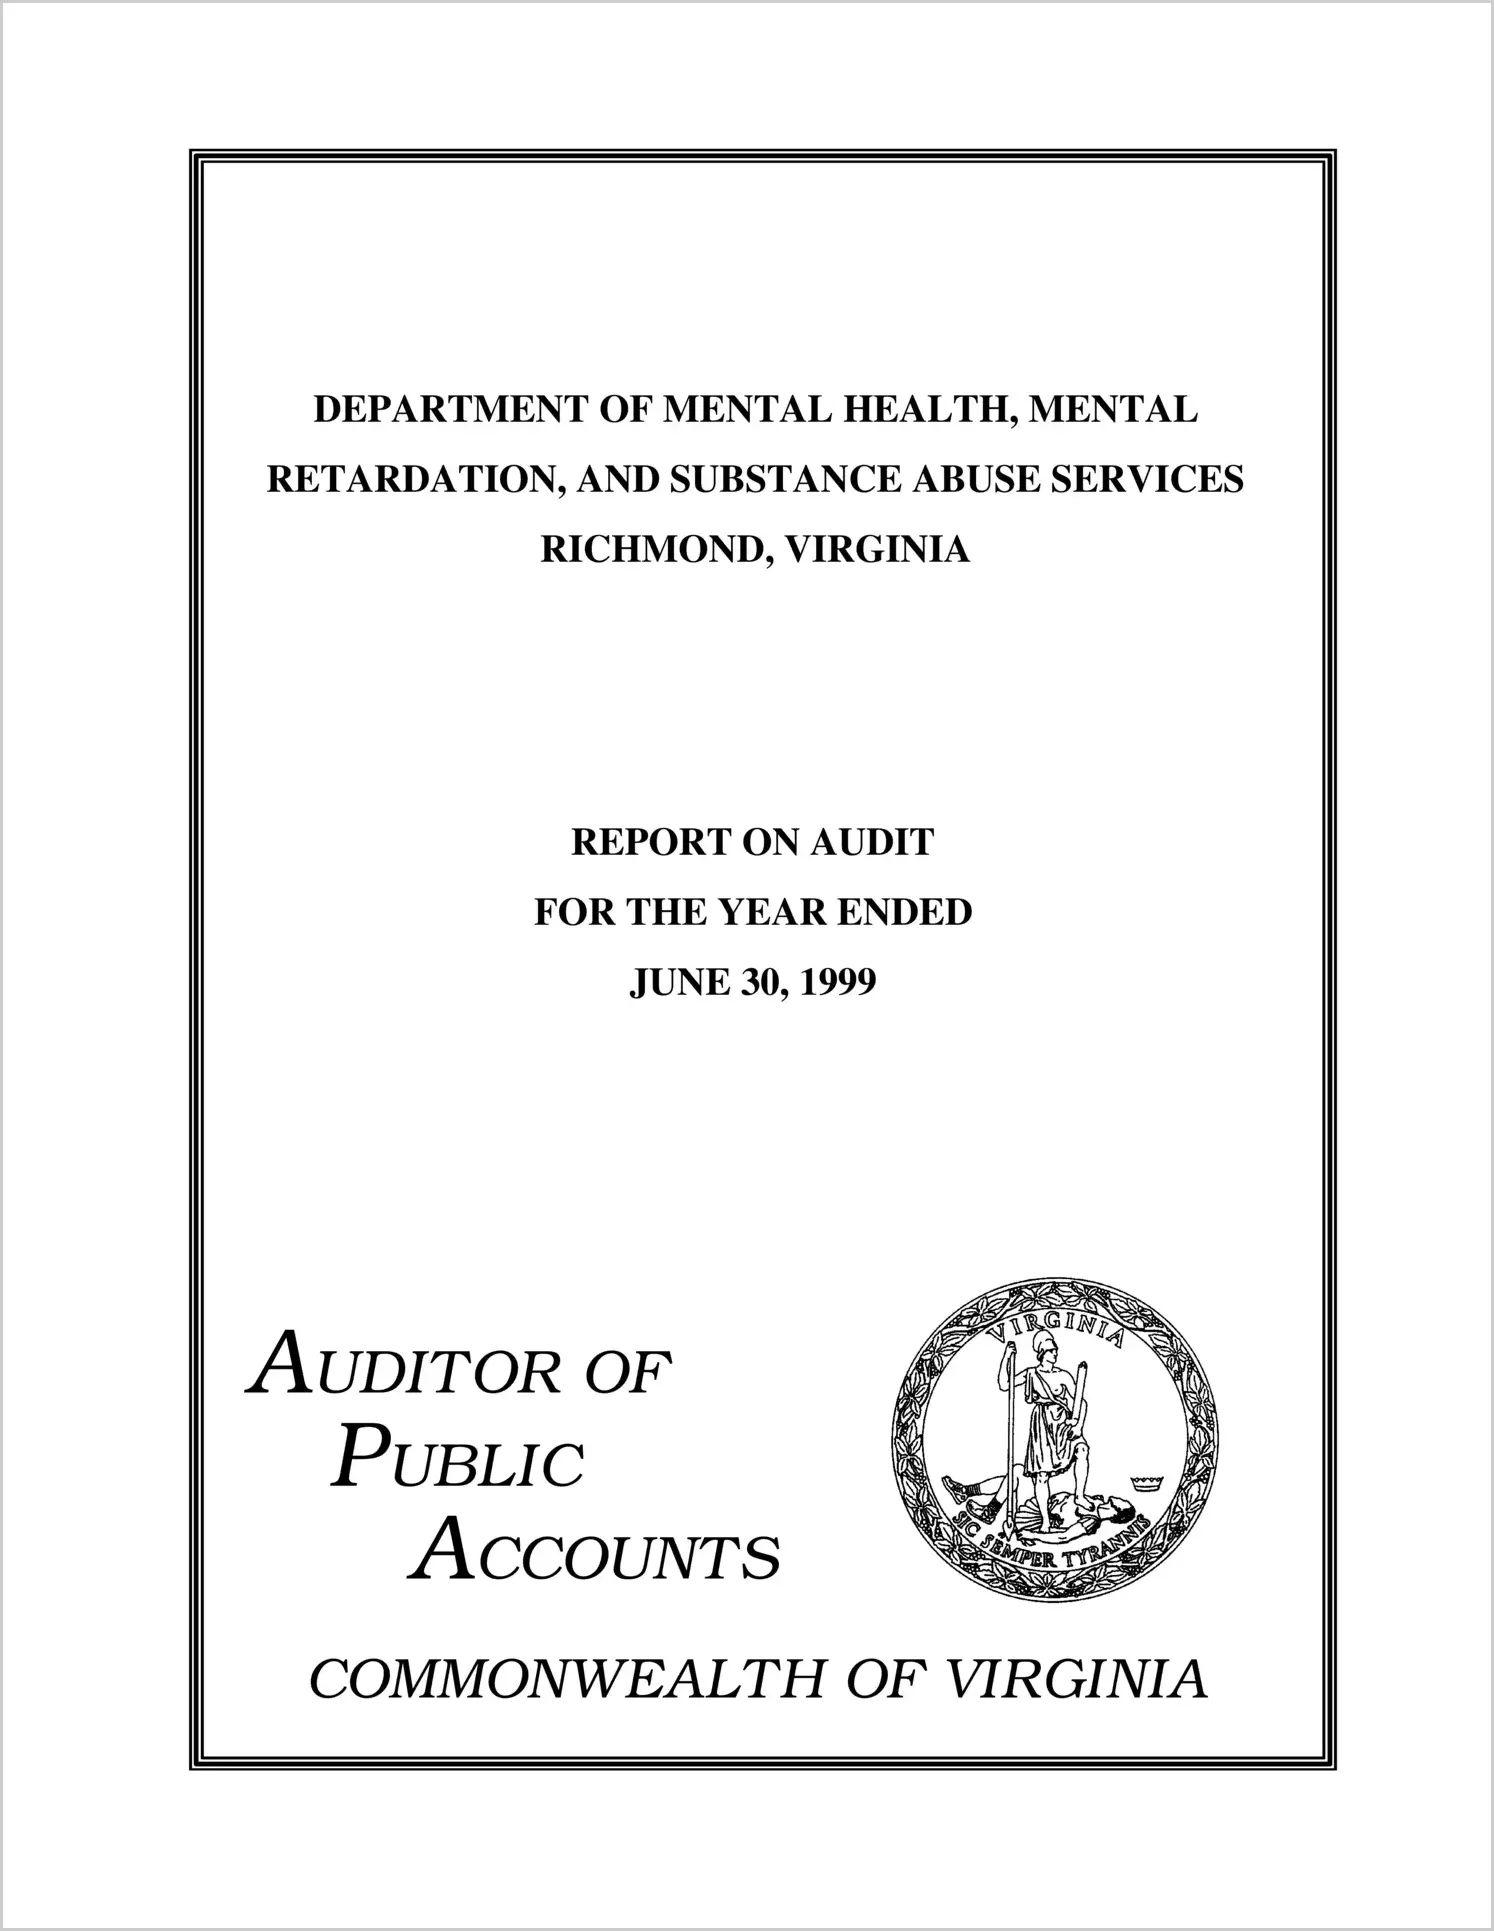 Department of Mental Health, Mental Retardation, and Substance Abuse Services for the year ended June 30, 1999